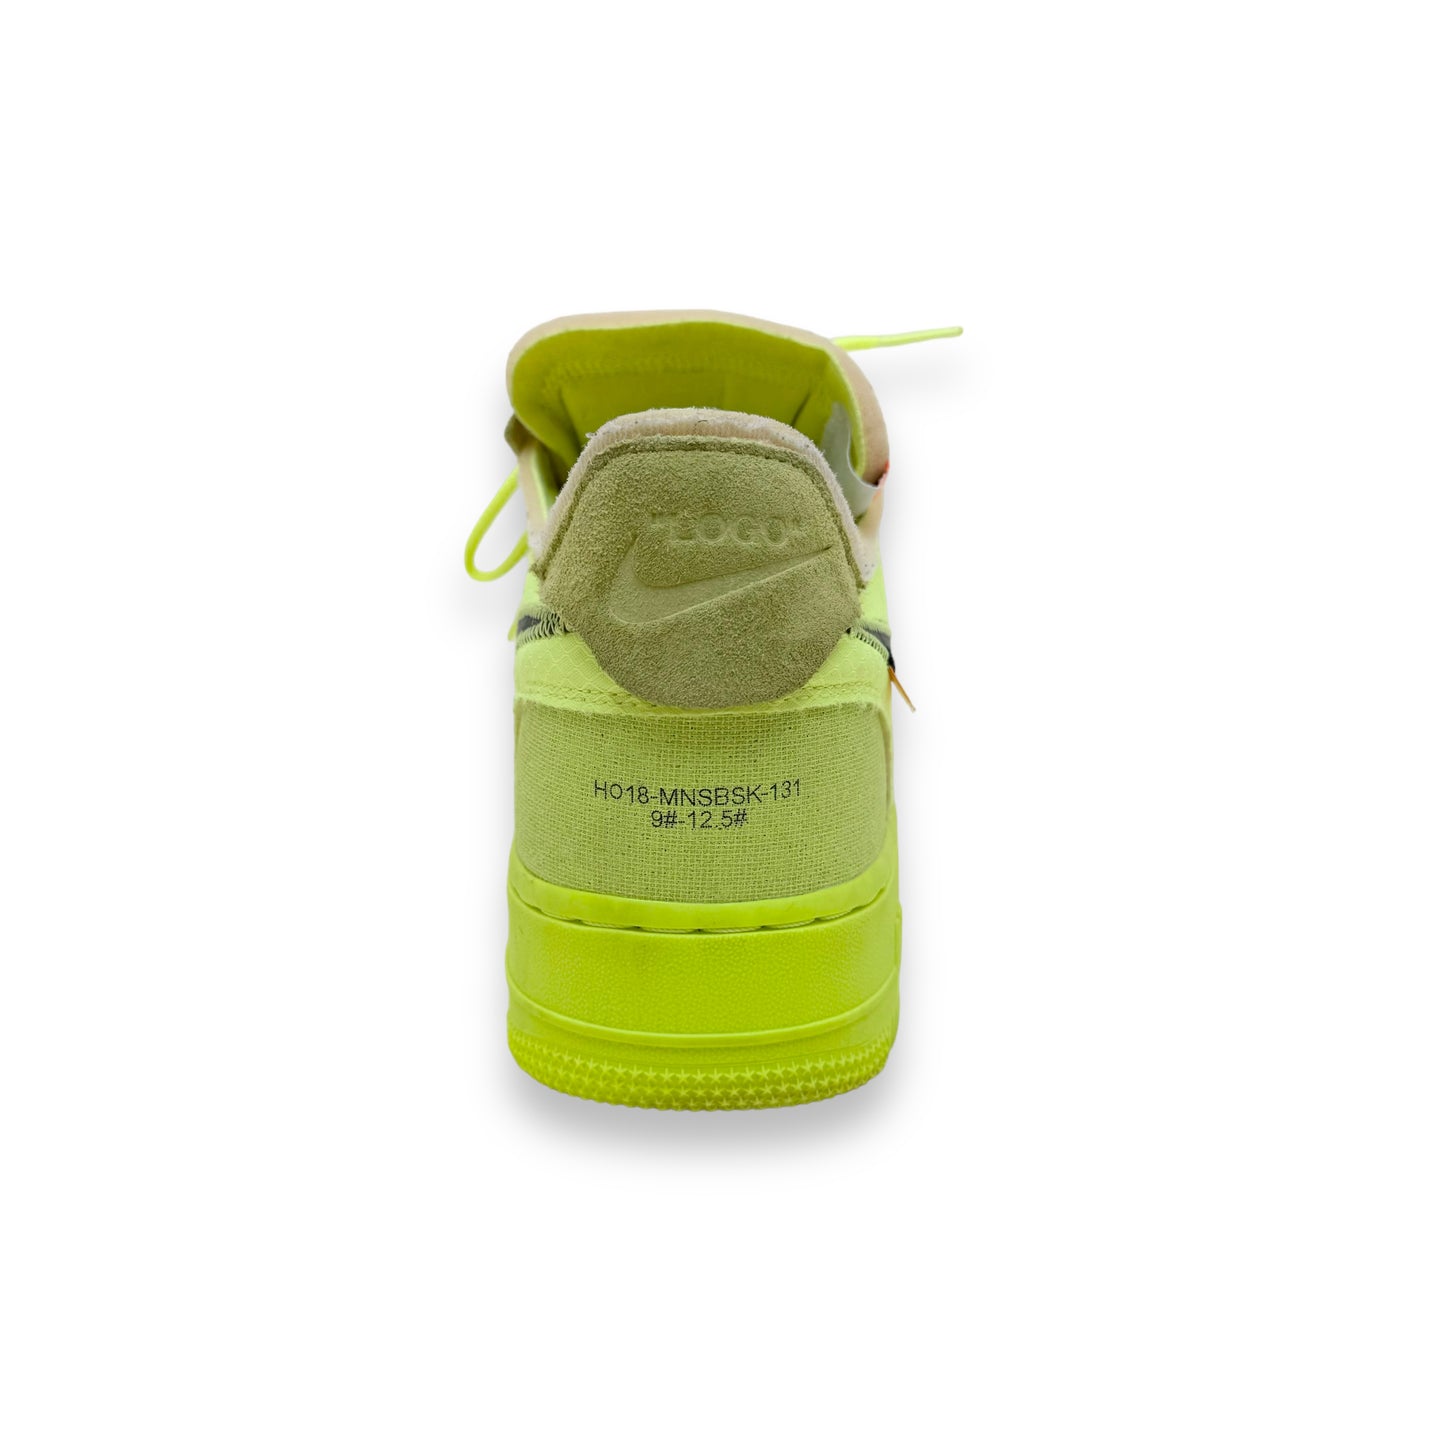 NIKE AIRFORCE 1 LOW X OFF-WHITE SNEAKERS VOLT UK8.5